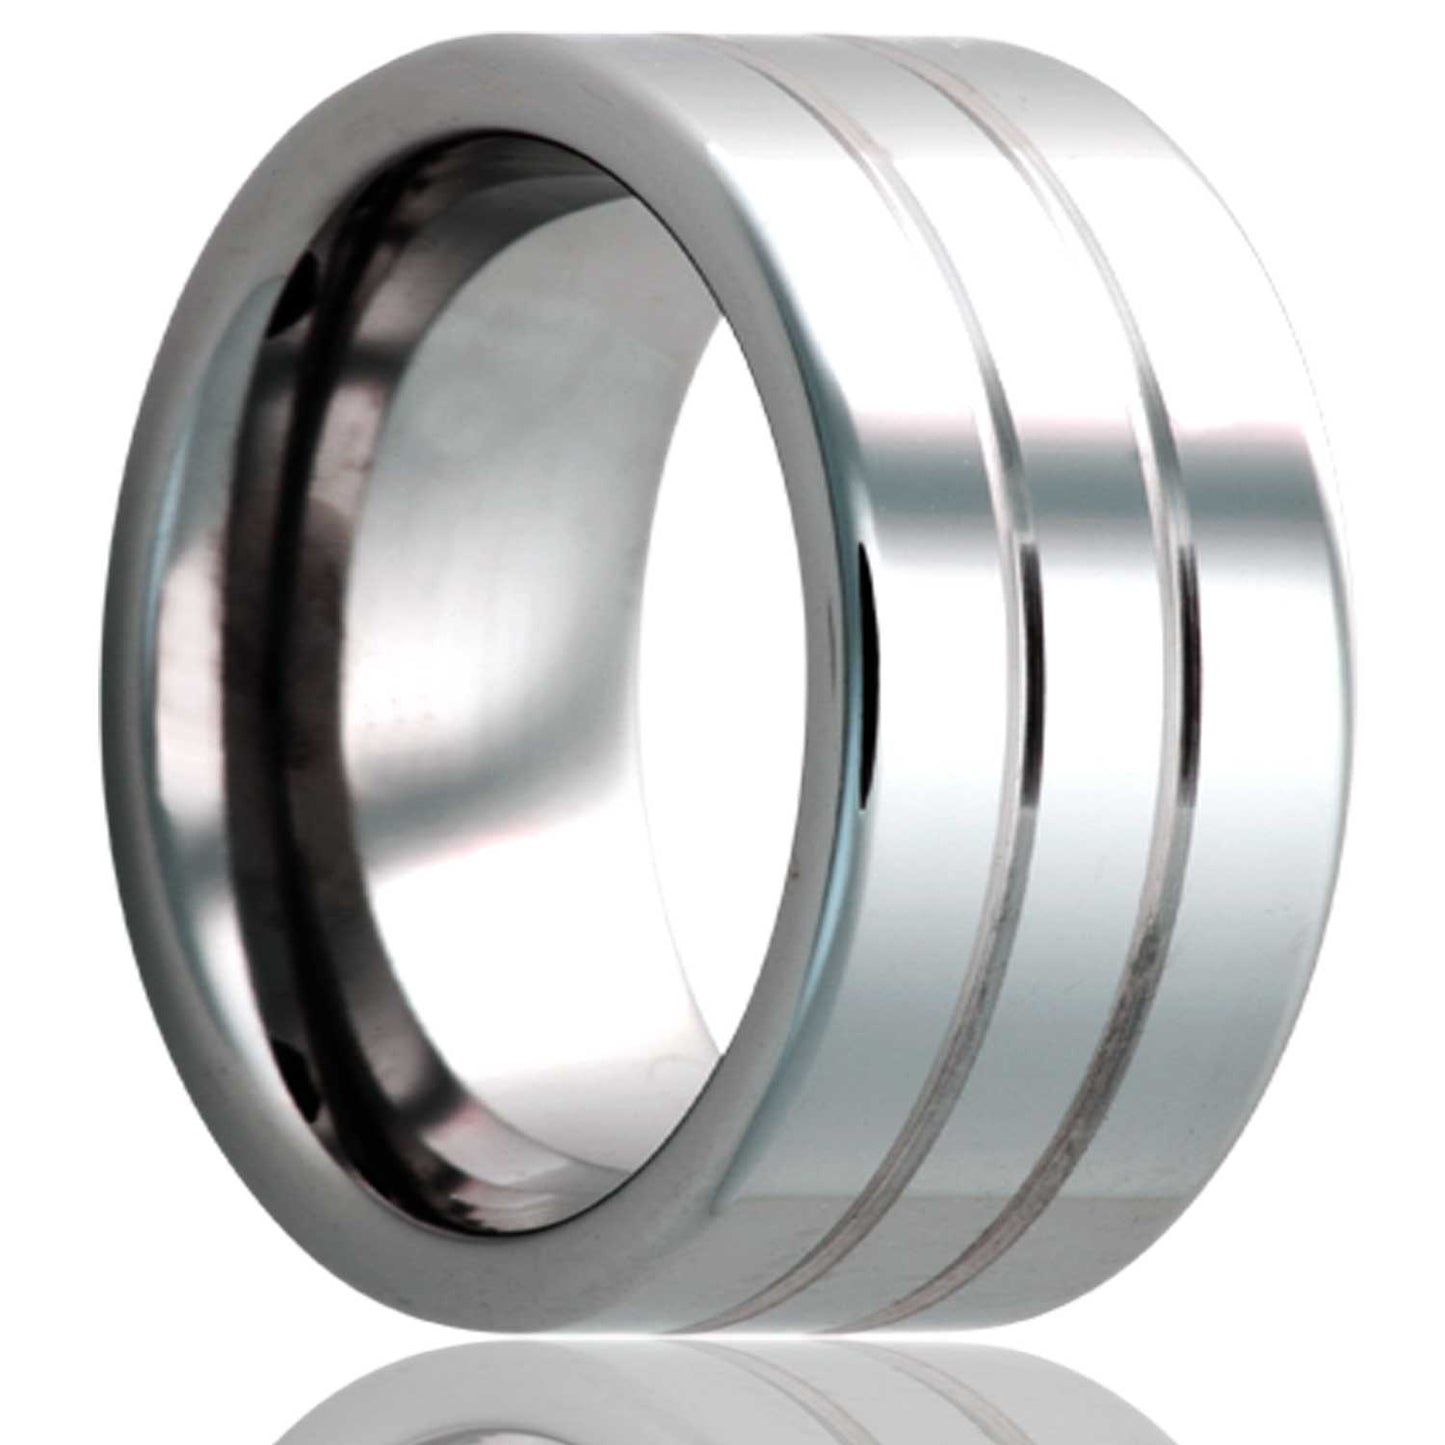 A grooved tungsten wedding band displayed on a neutral white background.